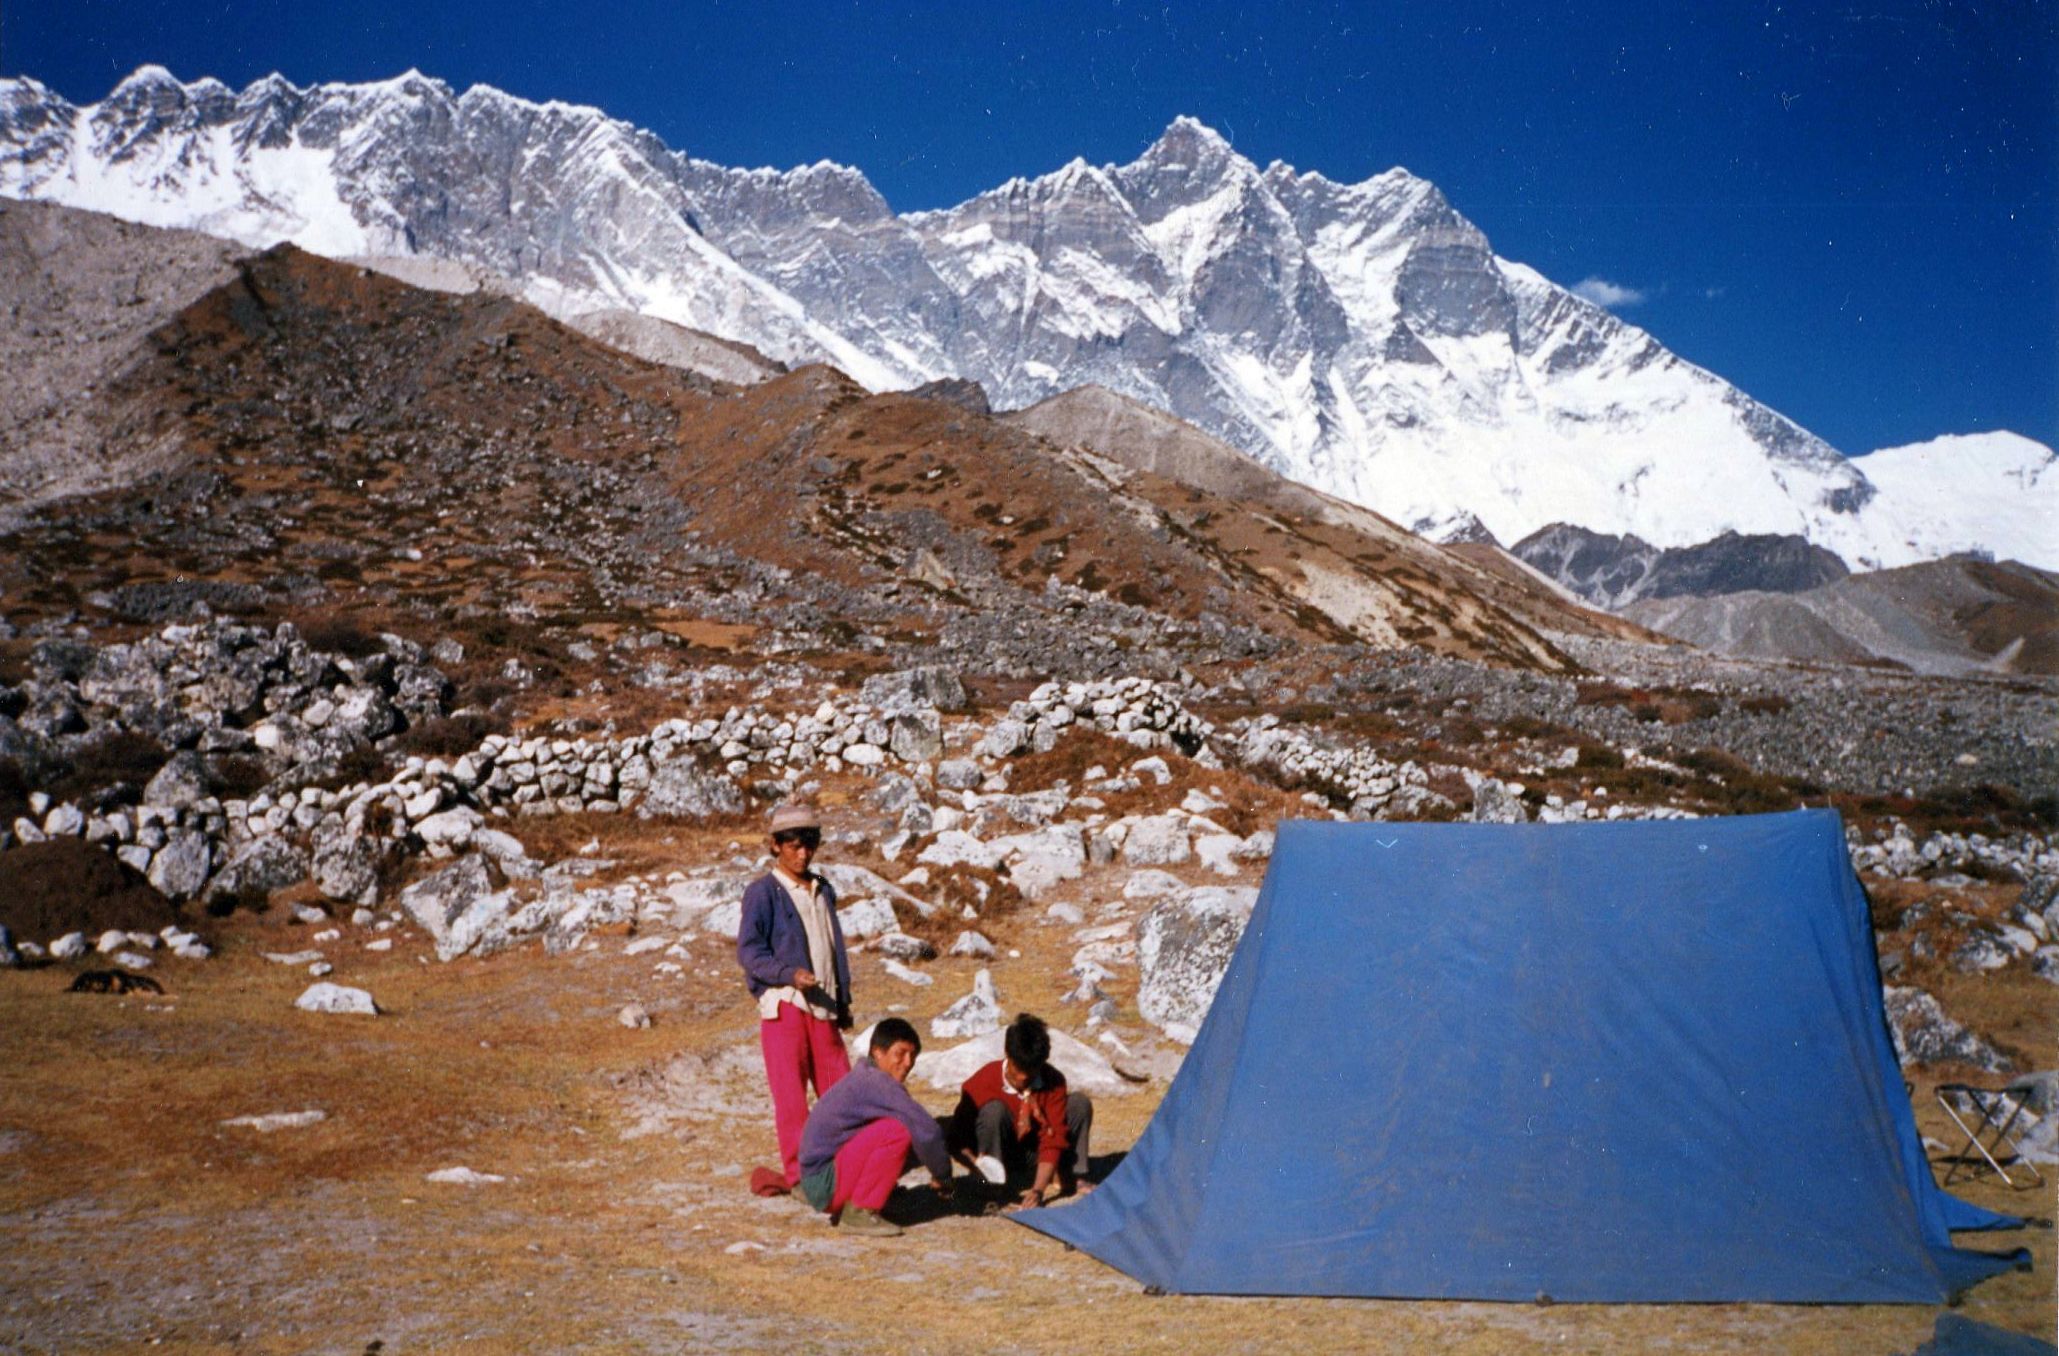 Mount Lhotse from camp at Chukhung in the Imja Khosi Valley in the Khumbu Region of the Nepal Himalaya